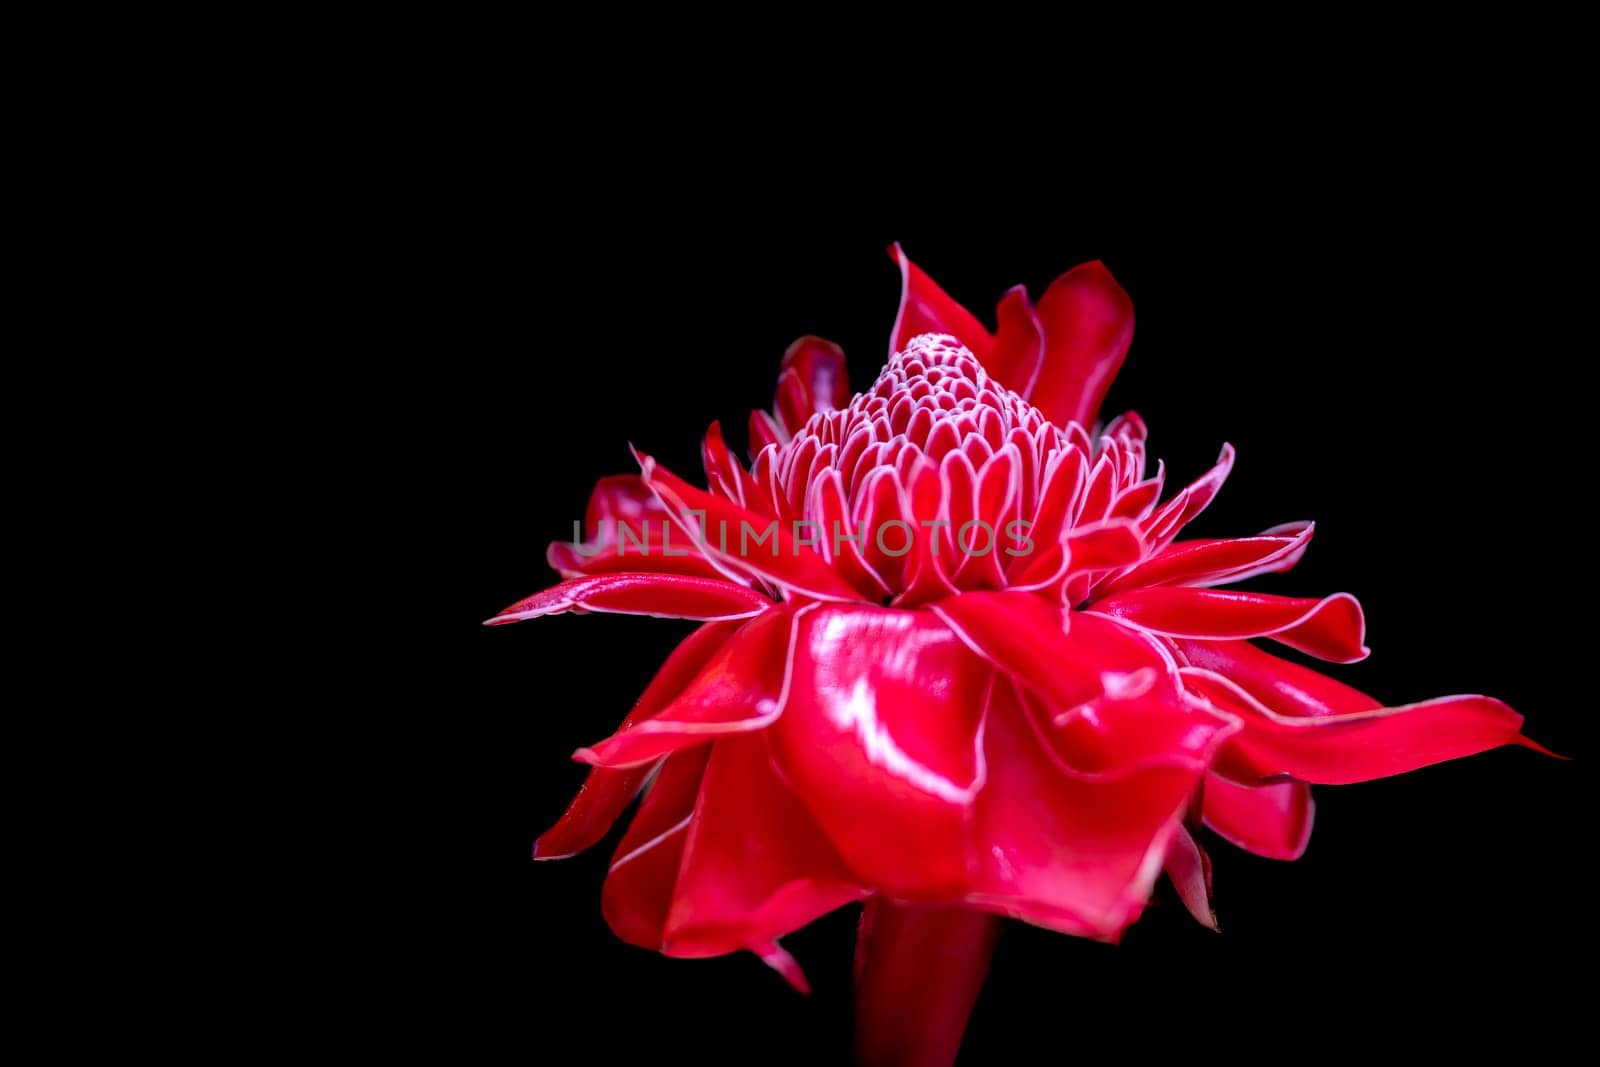 Vibrant Red Tropical Flower on a Pure Black Background by FerradalFCG